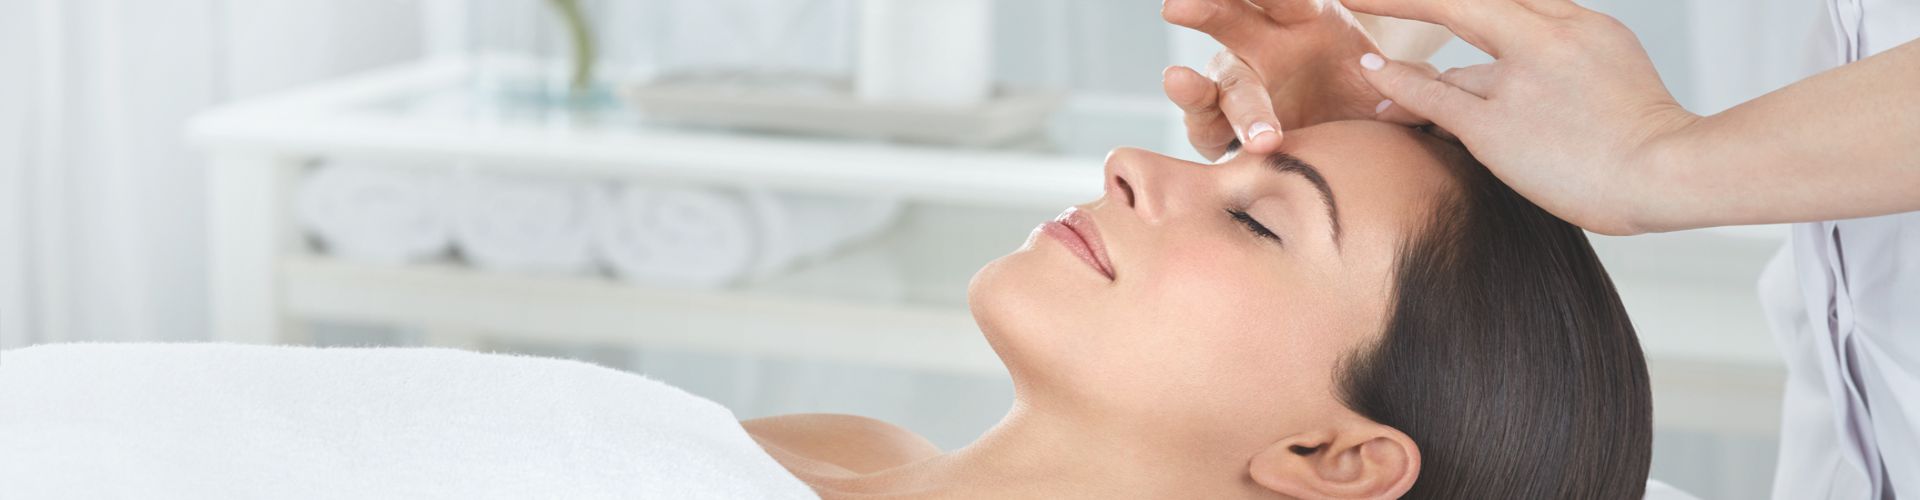 Elemis Facials with clinically proven anti-wrinkle, radiance and resurfacing